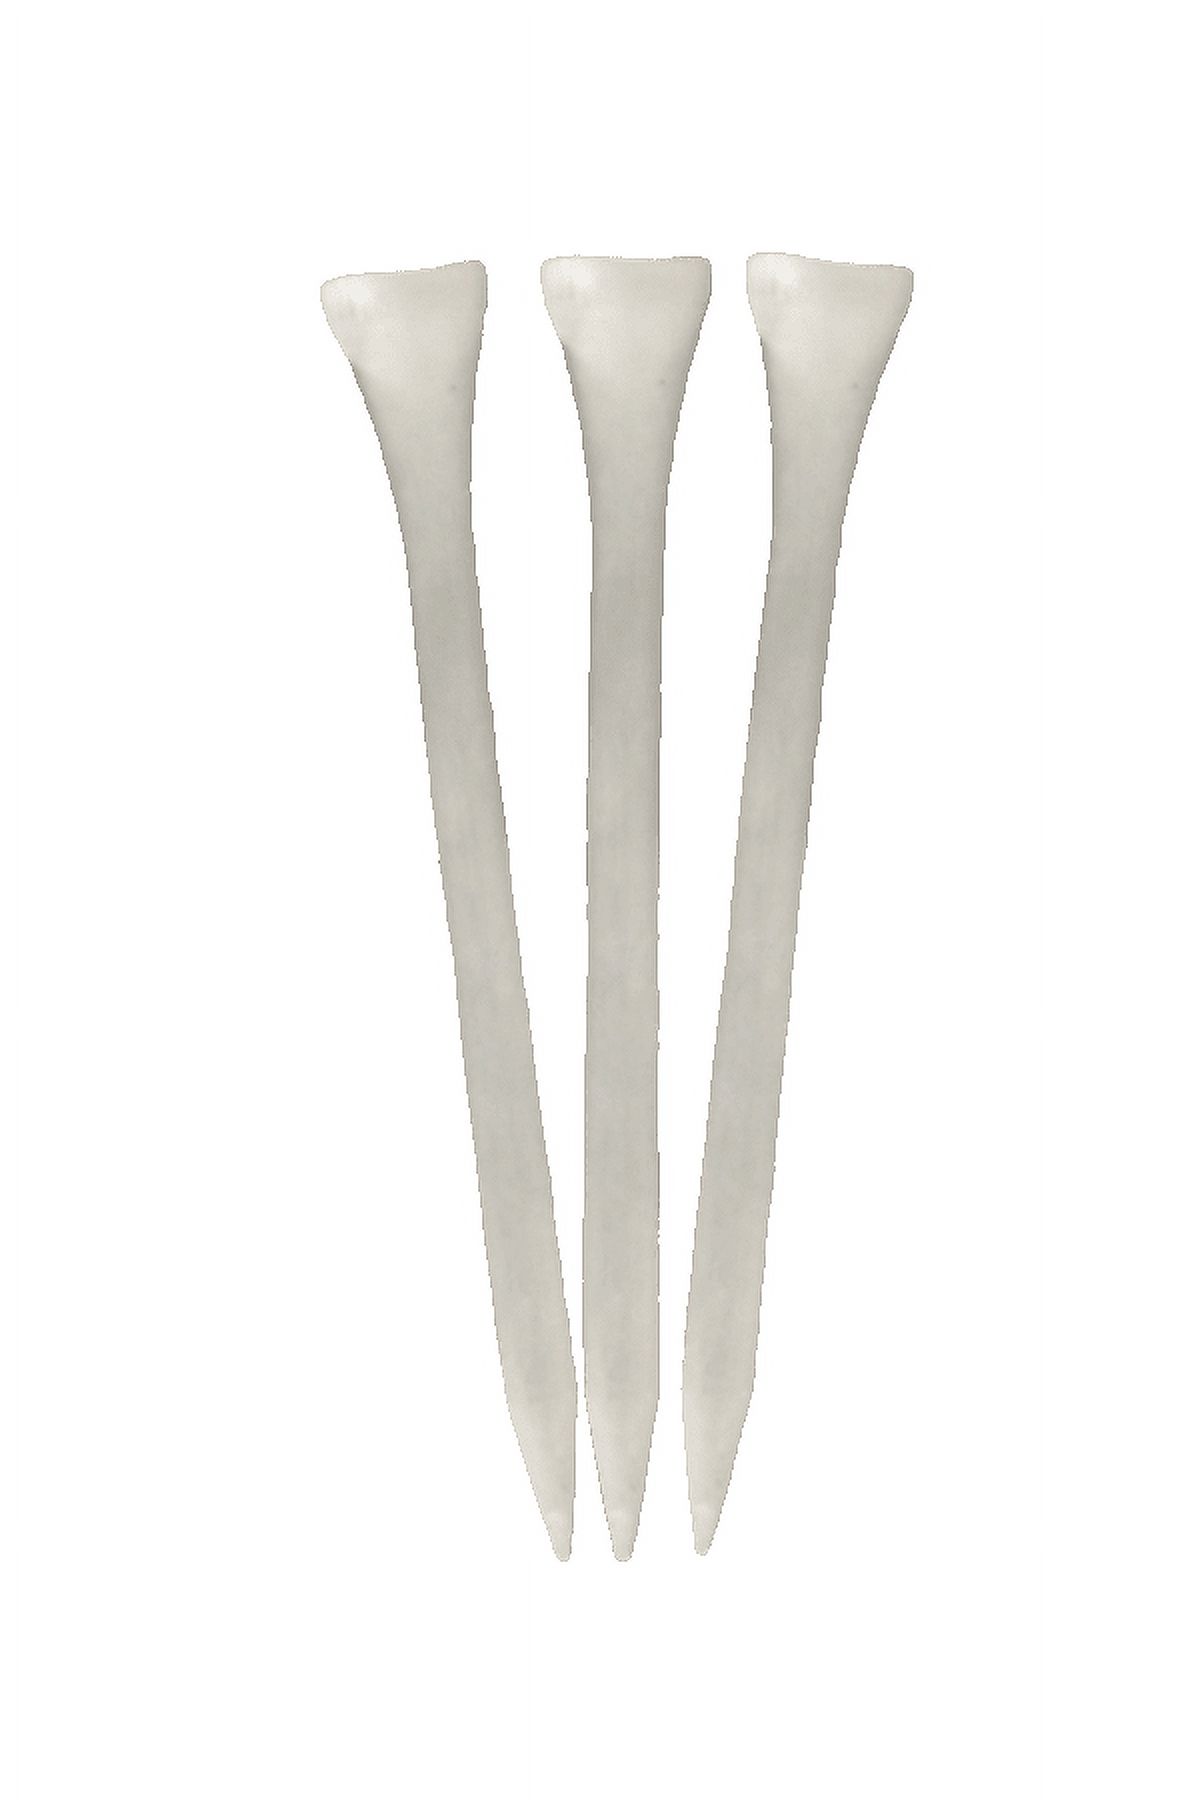 ProActive Sports 2 3/4-Inch Golf Tees 100 Pack (White) - image 1 of 5